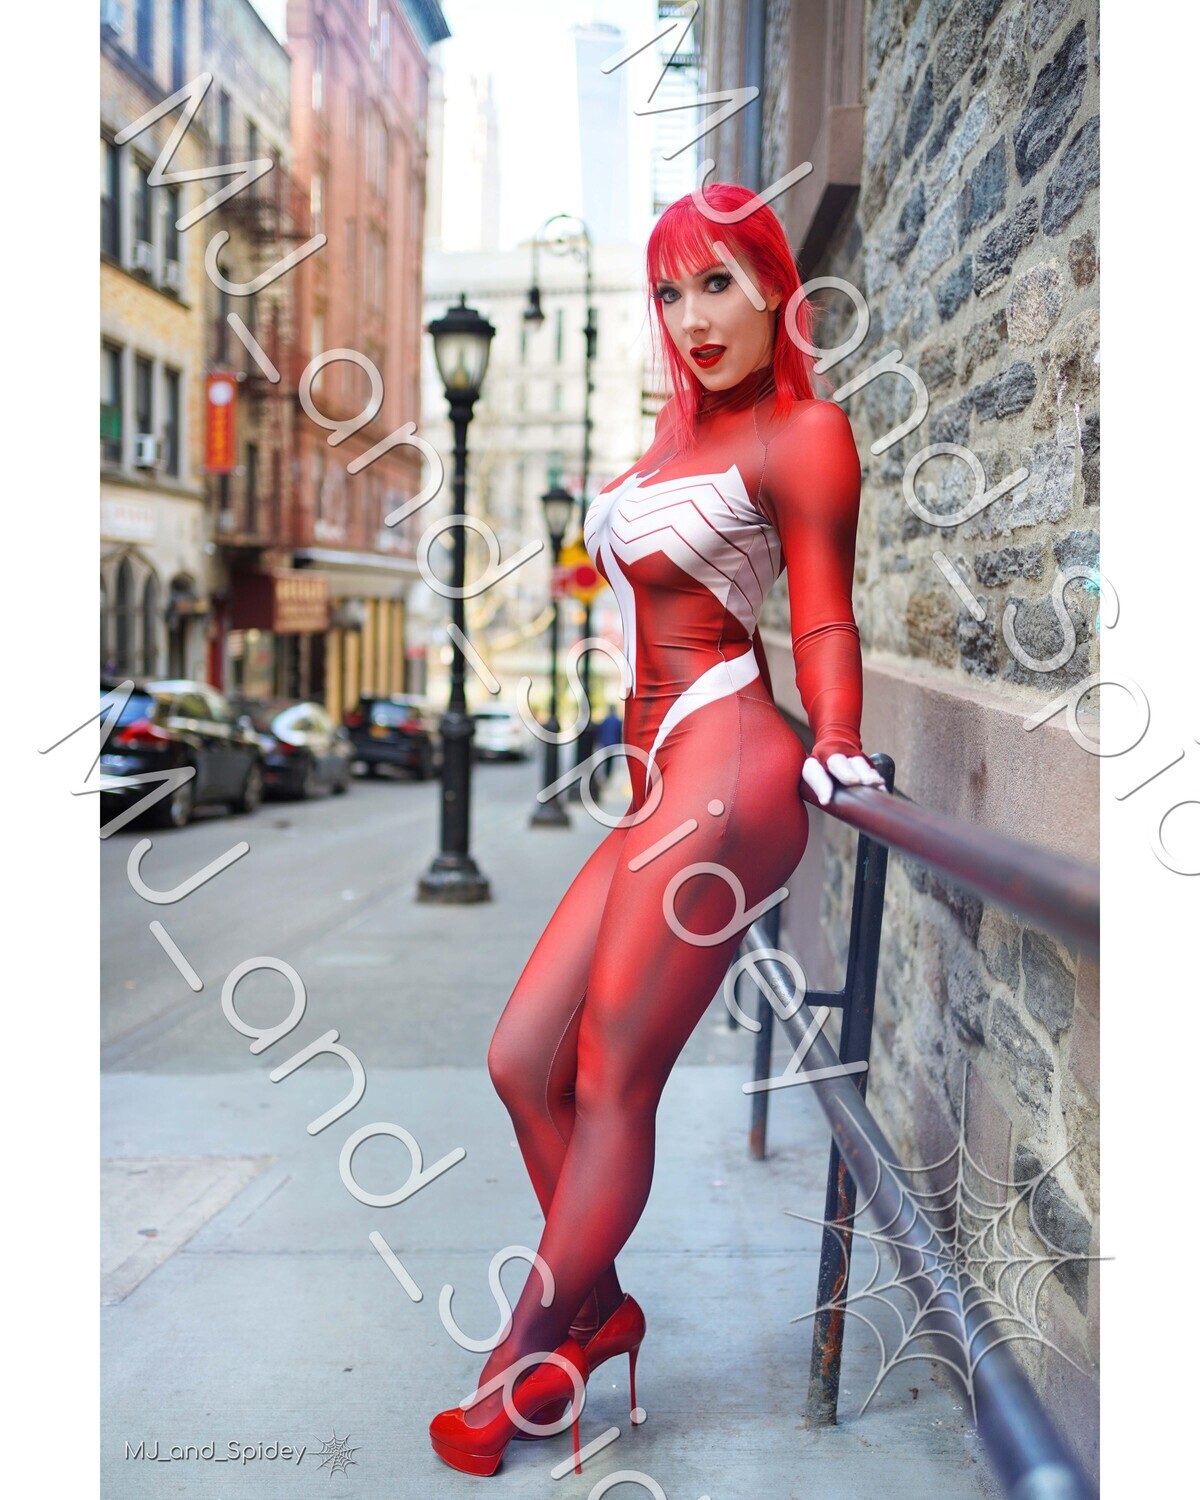 Marvel - Spider-Man - Mary Jane Watson - Ultimate Spider-Woman 2 -  Cosplay Print (@MJ_and_Spidey, MJ and Spidey, Comics)